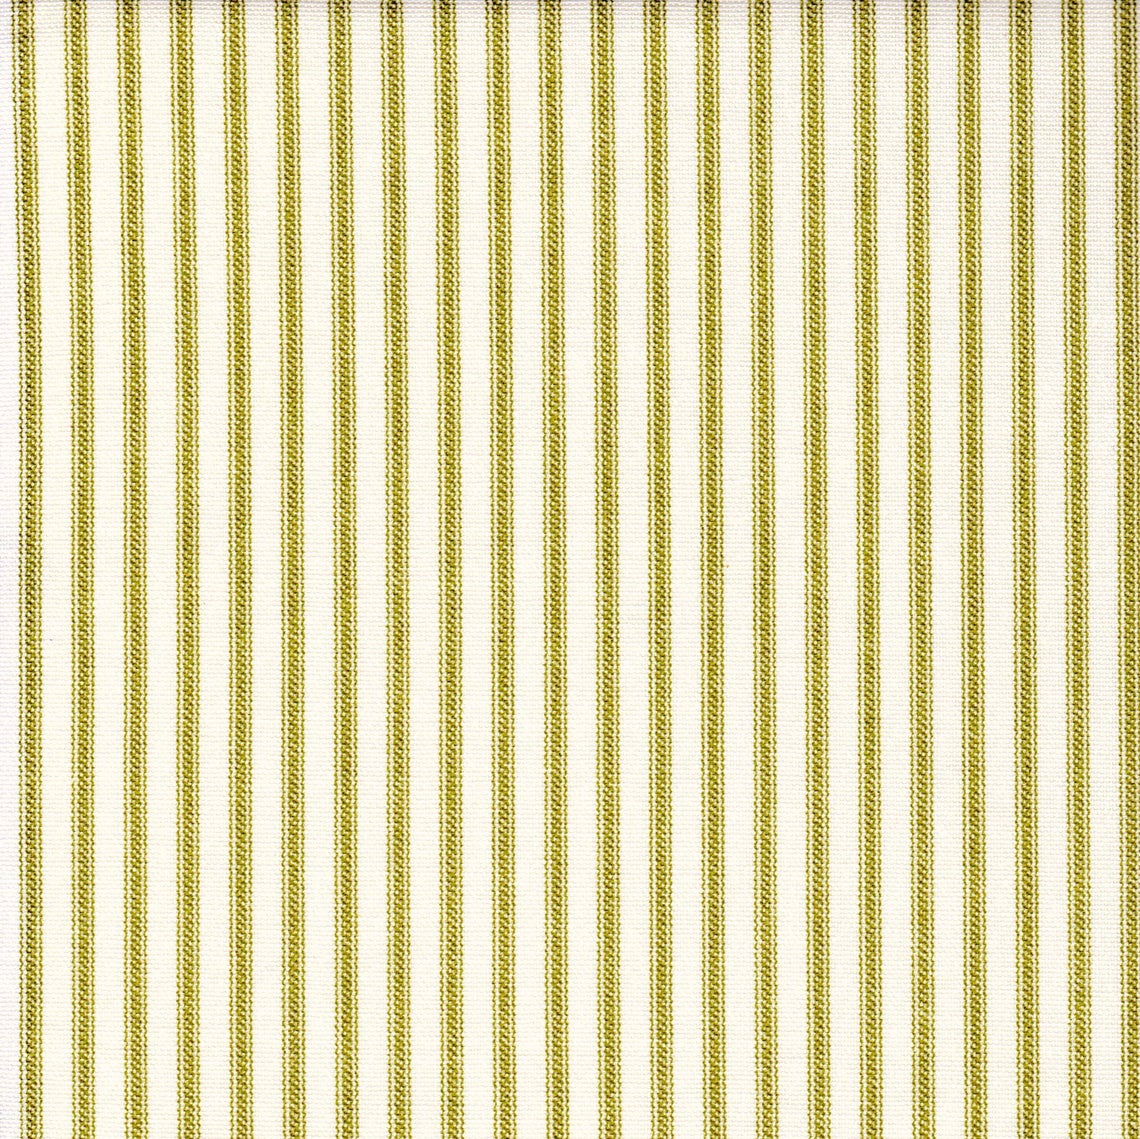 gathered bedskirt in farmhouse meadow green ticking stripe on cream